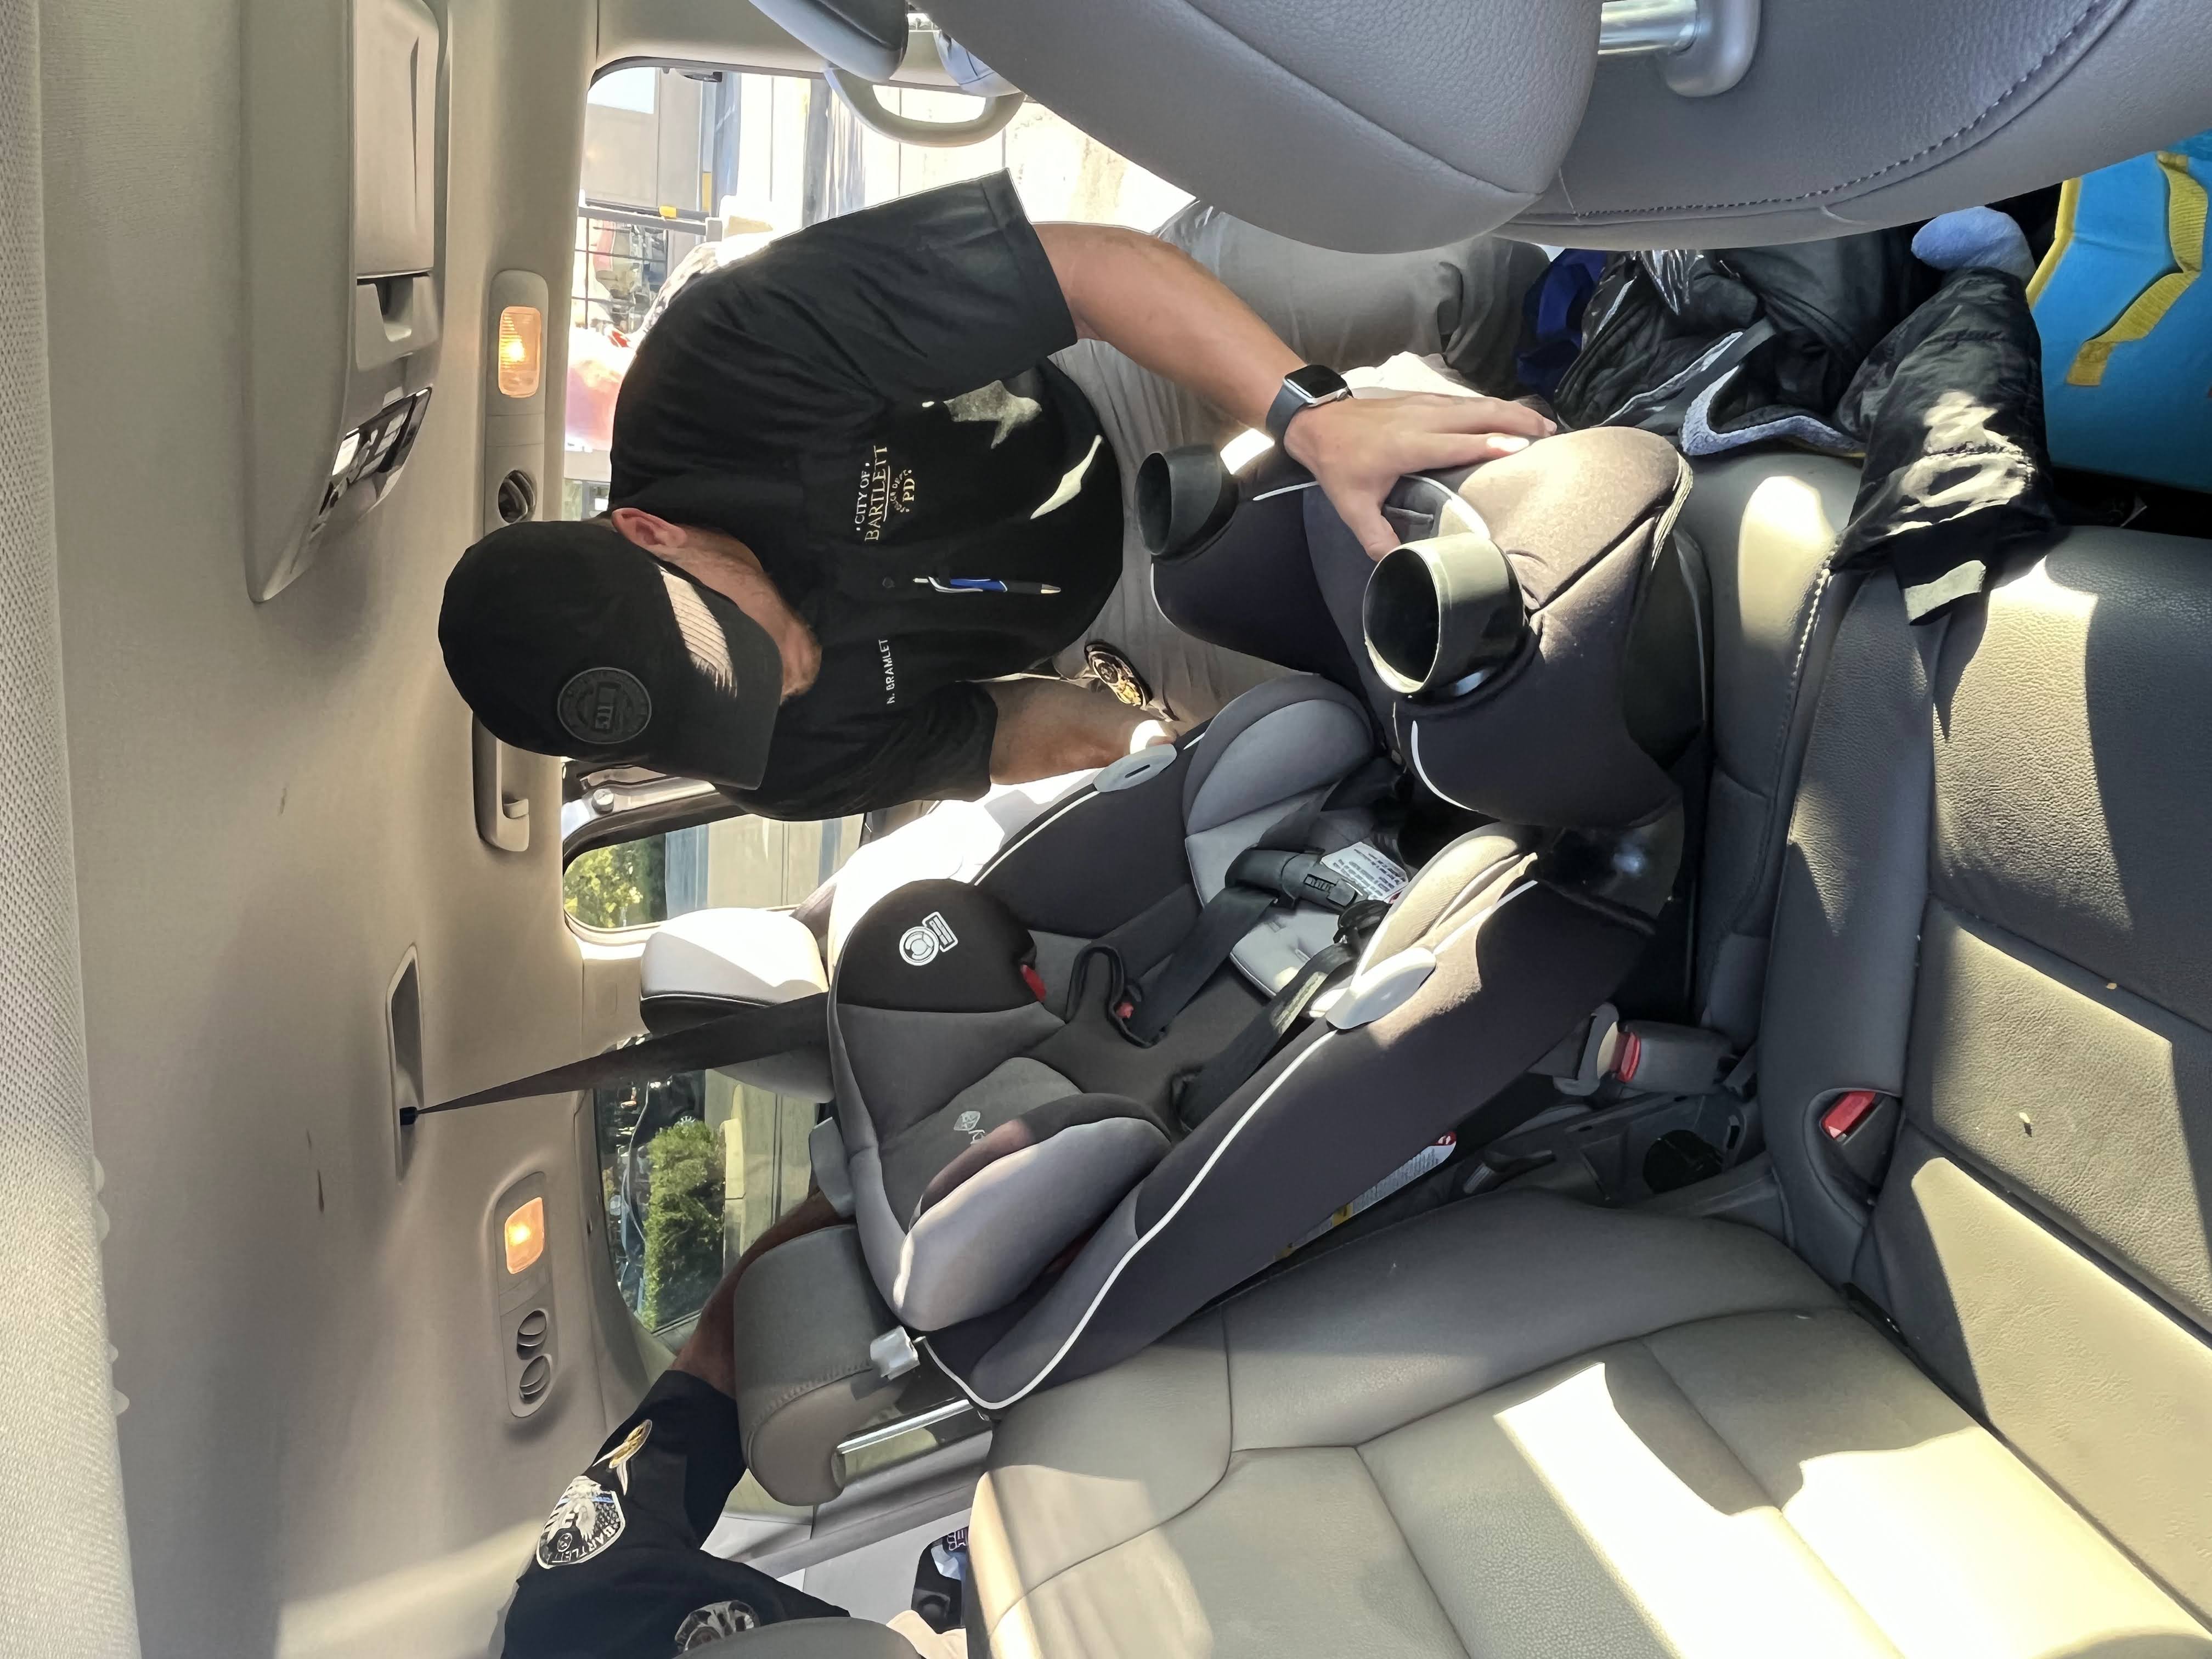 Officer Nick Bramlett from the Bartlett, Tennessee police department checks the installation of a child car seat.